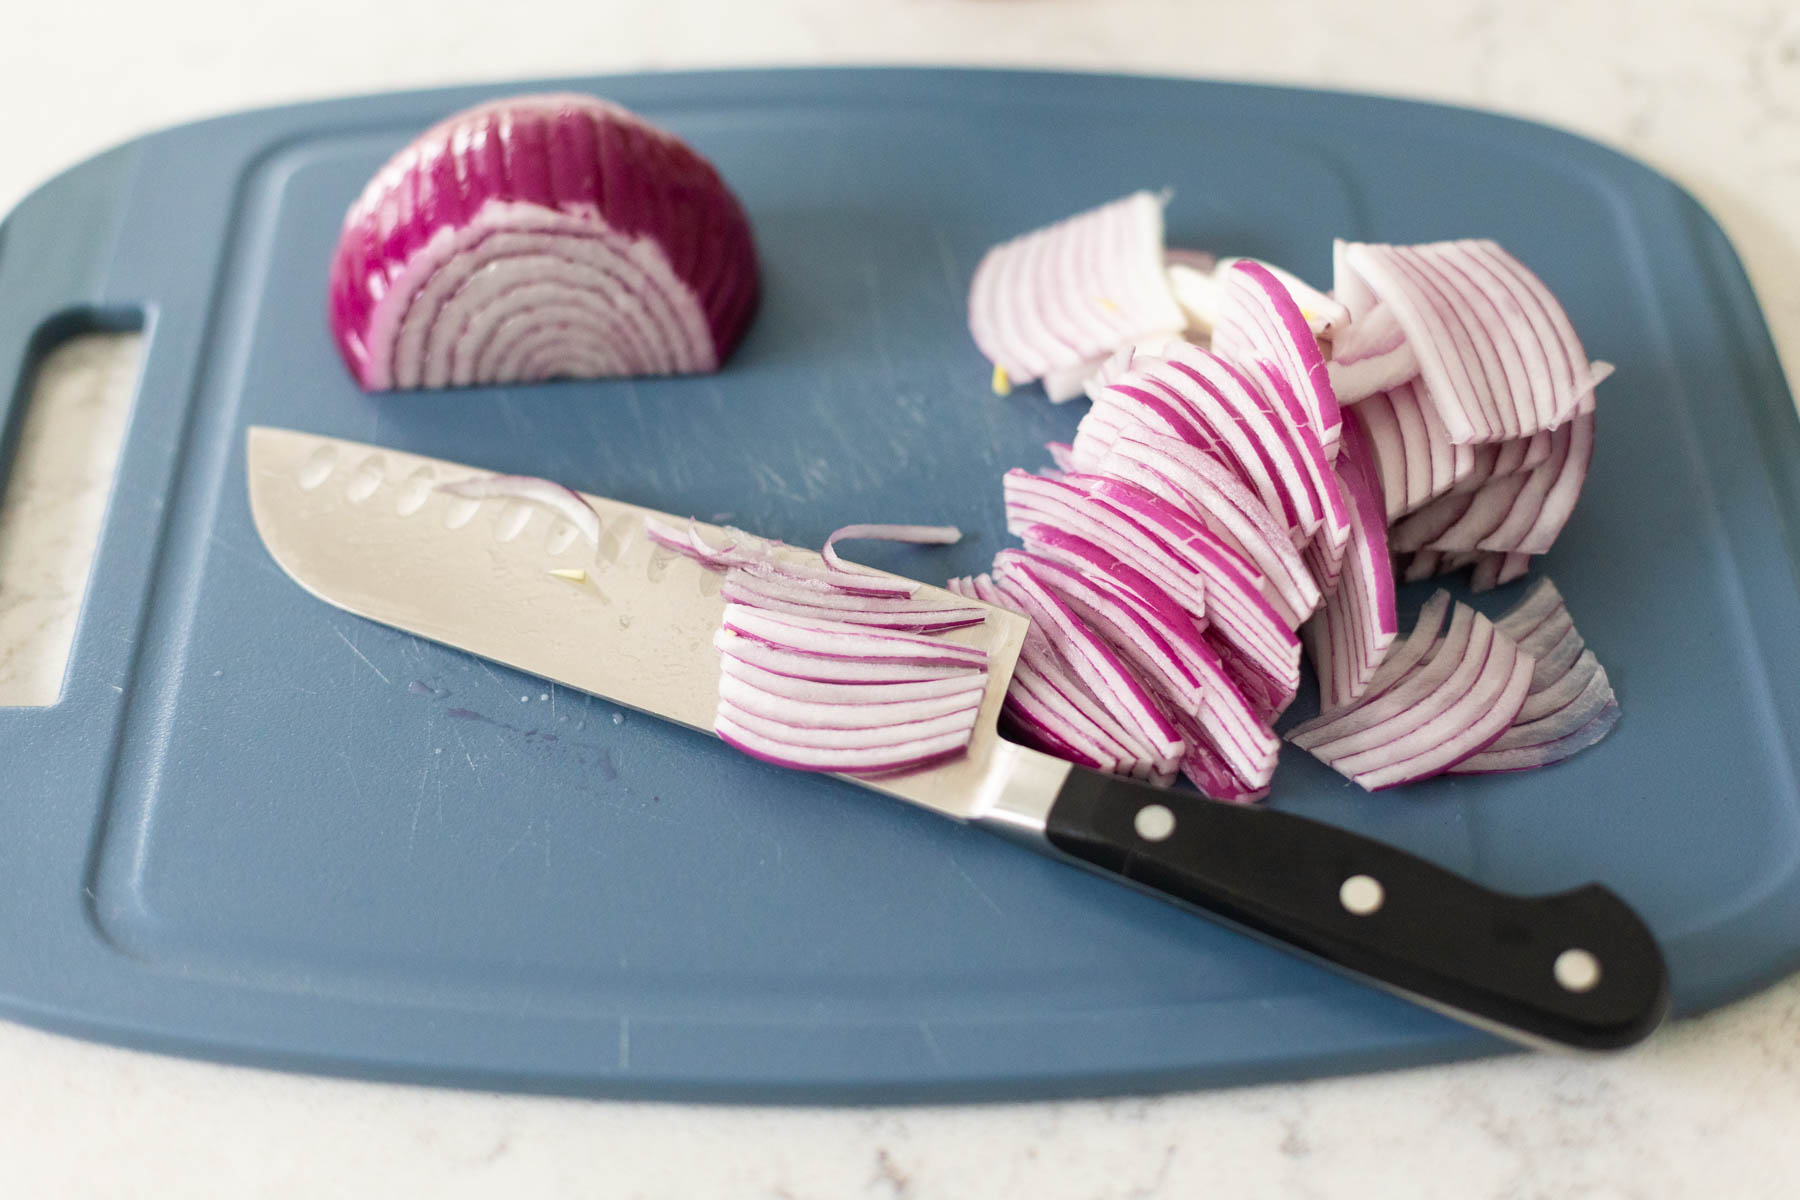 The onion has been cut on a cutting board with a large chef knife.